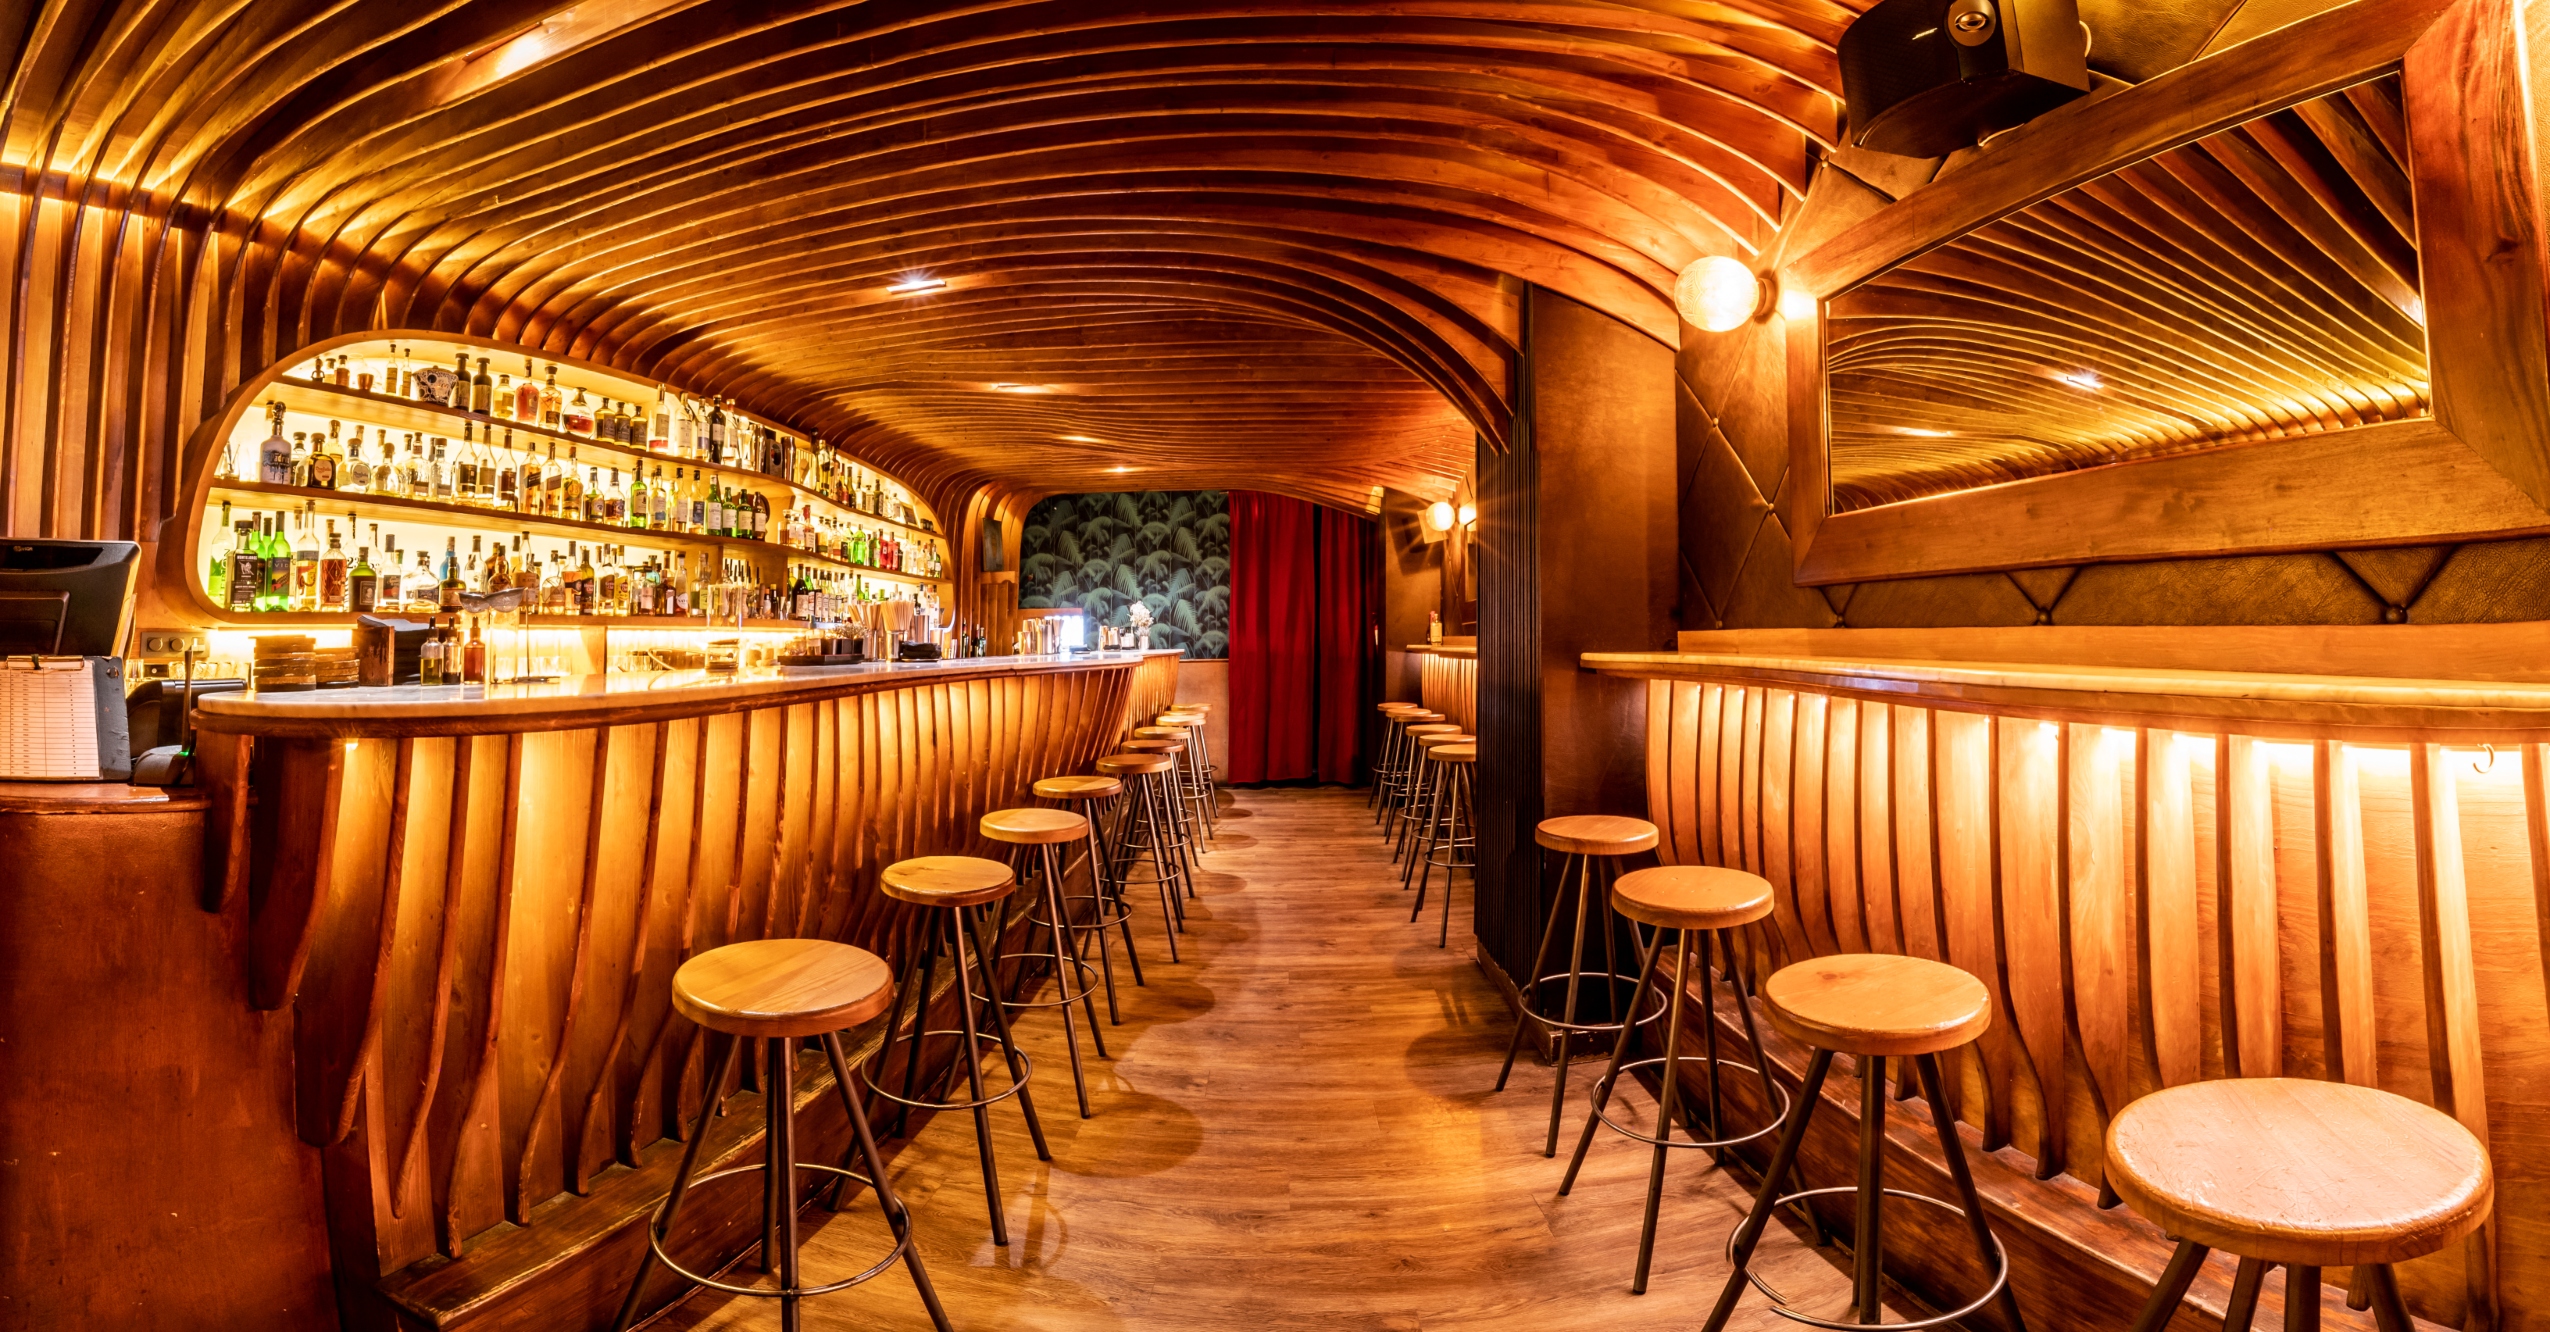 Barcelona Has Some Of The World's Best Bars—Here's Where To Go Now